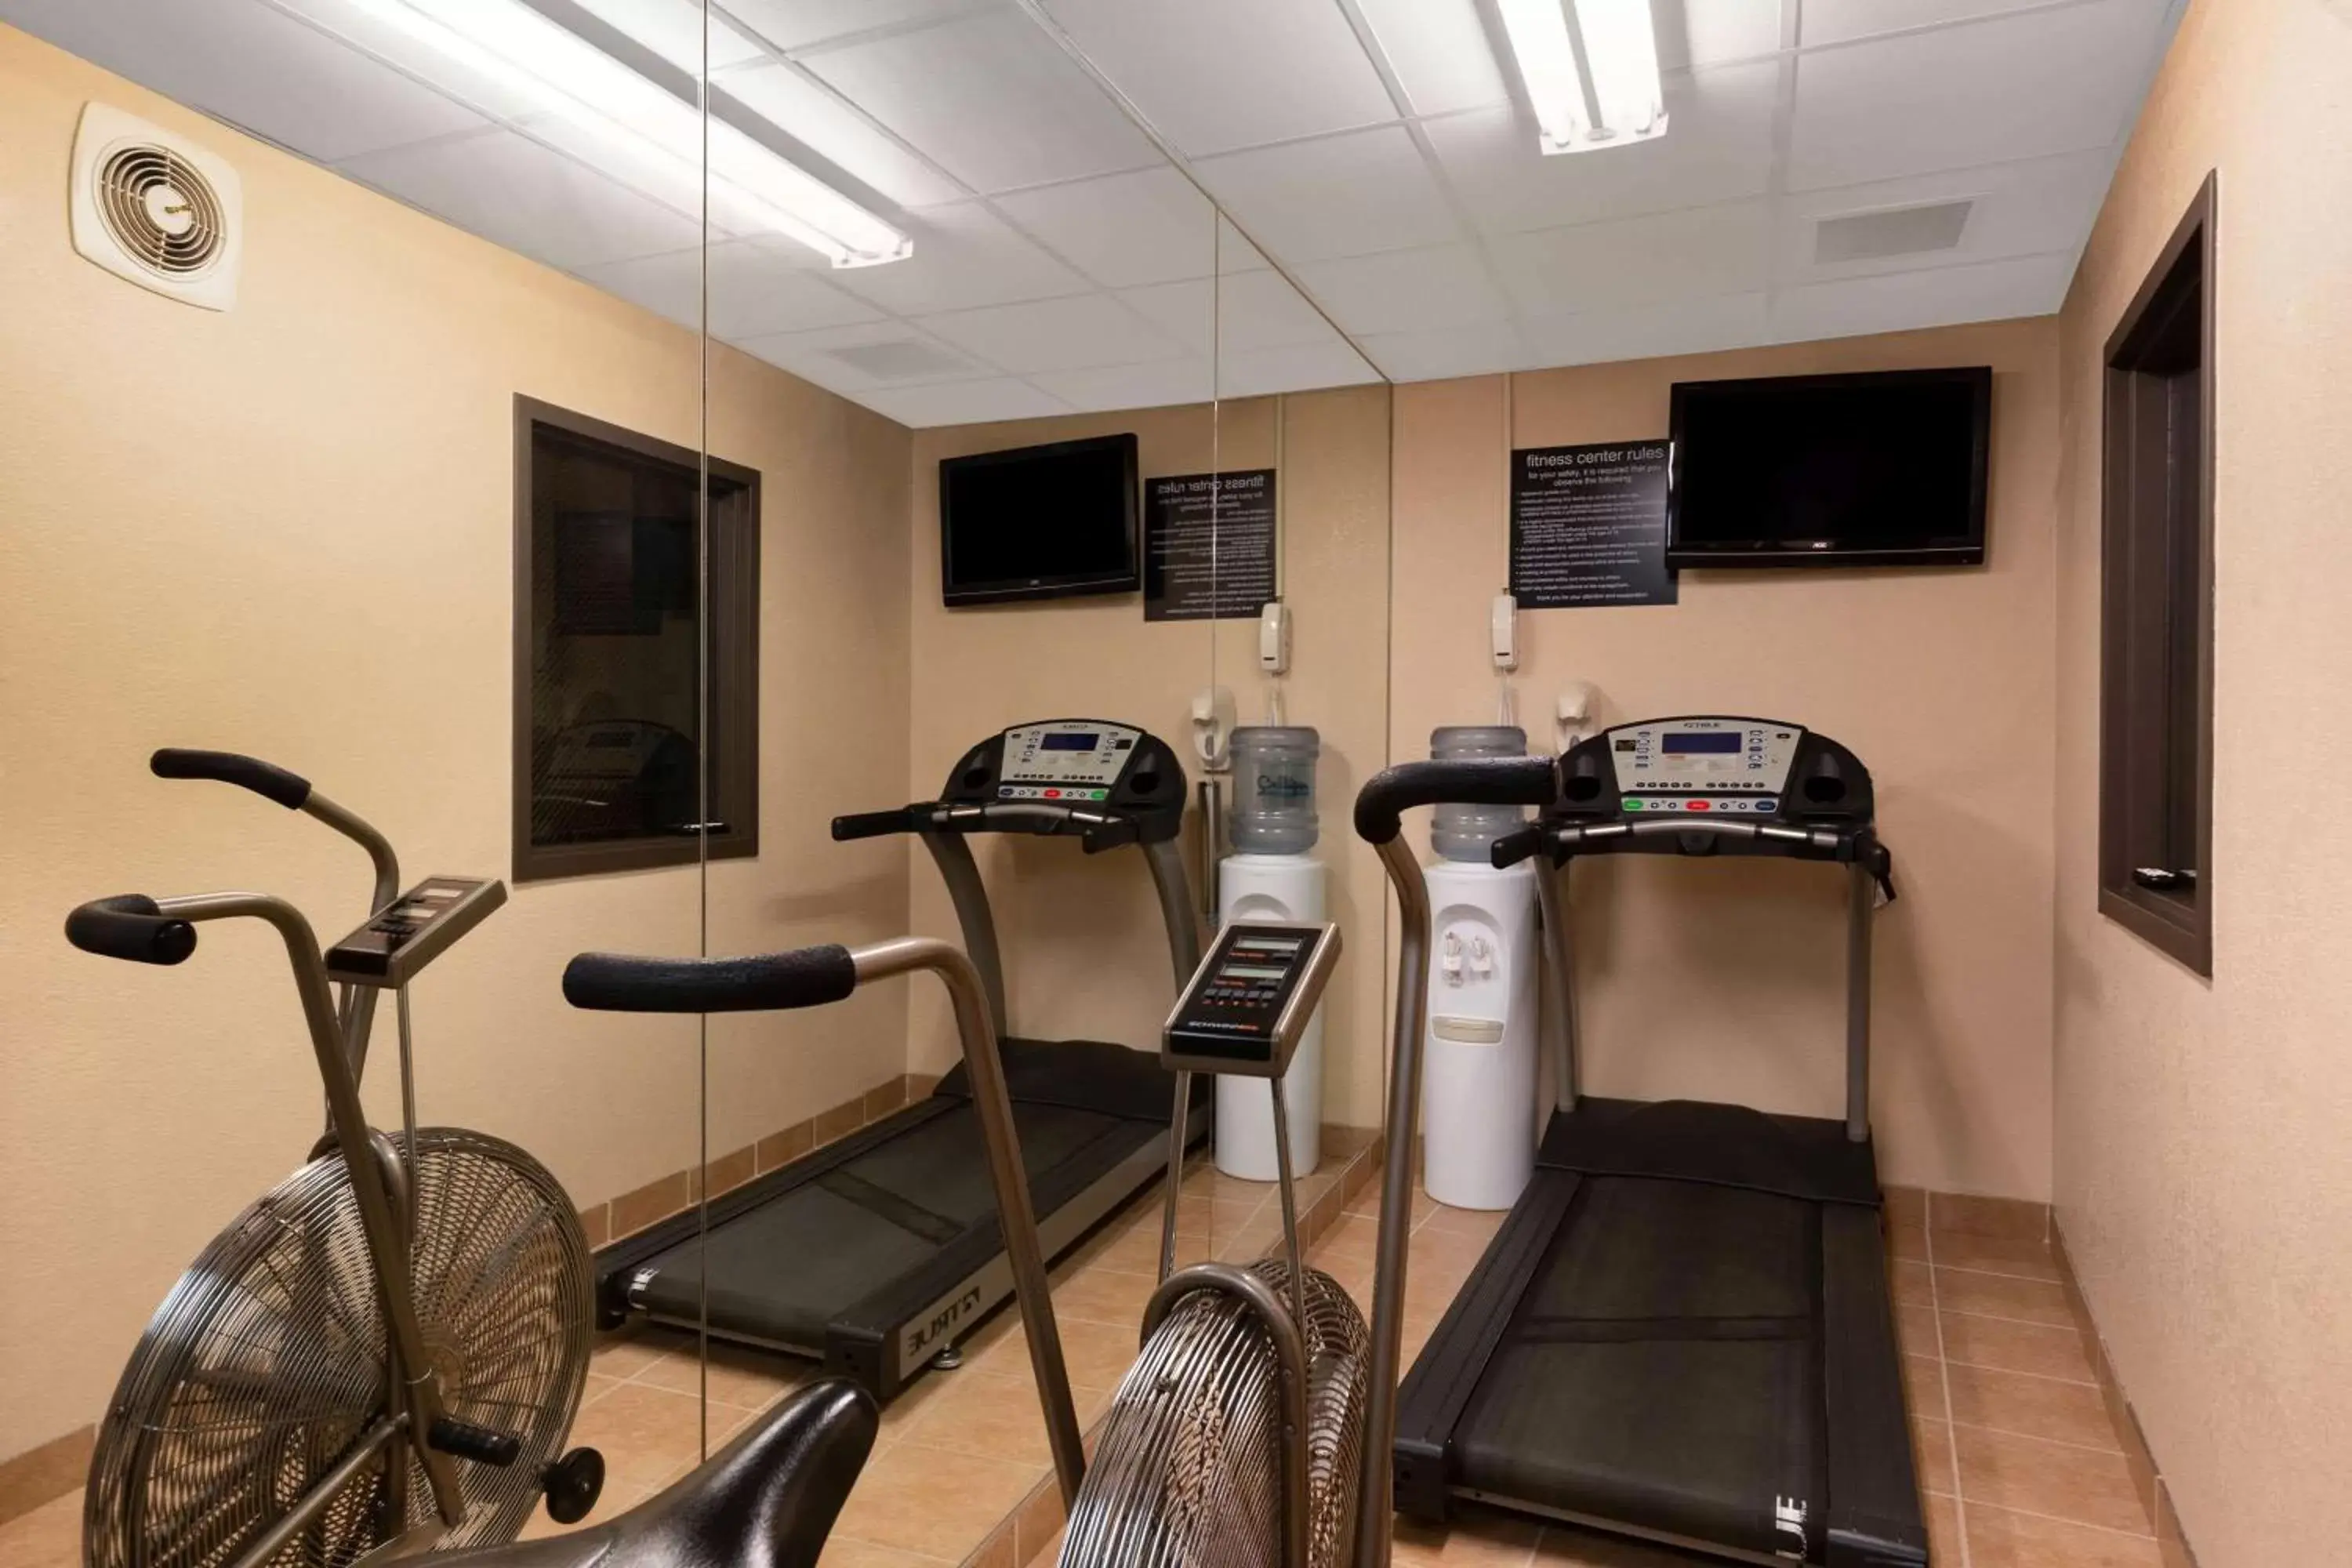 Fitness centre/facilities, Fitness Center/Facilities in Super 8 by Wyndham North Platte